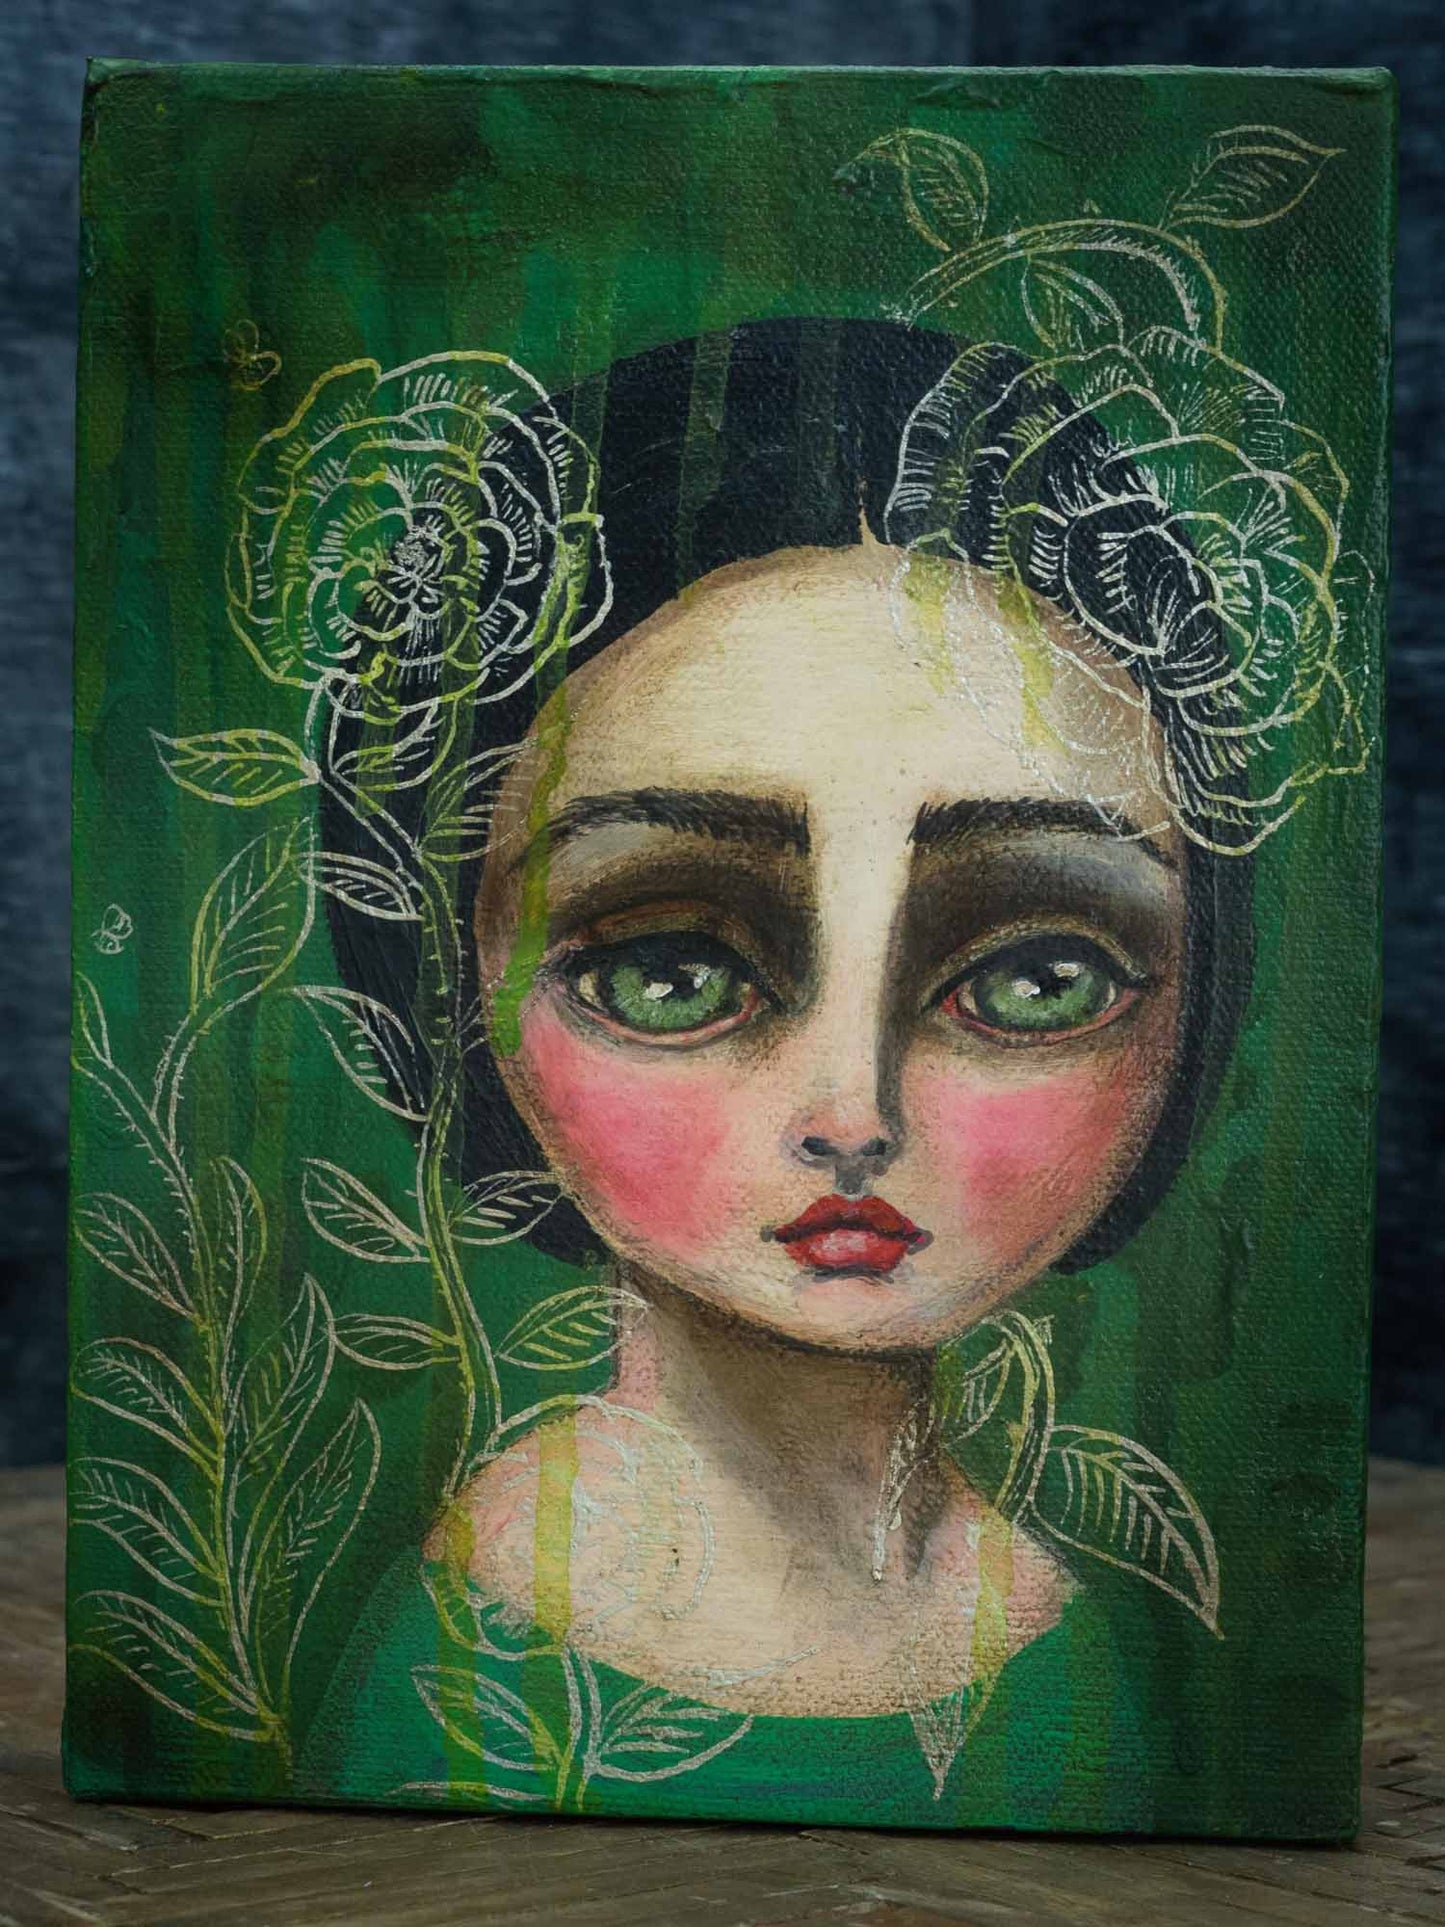 Peony is a beautiful girl with big green eyes painted by Danita in a surreal whimsical style